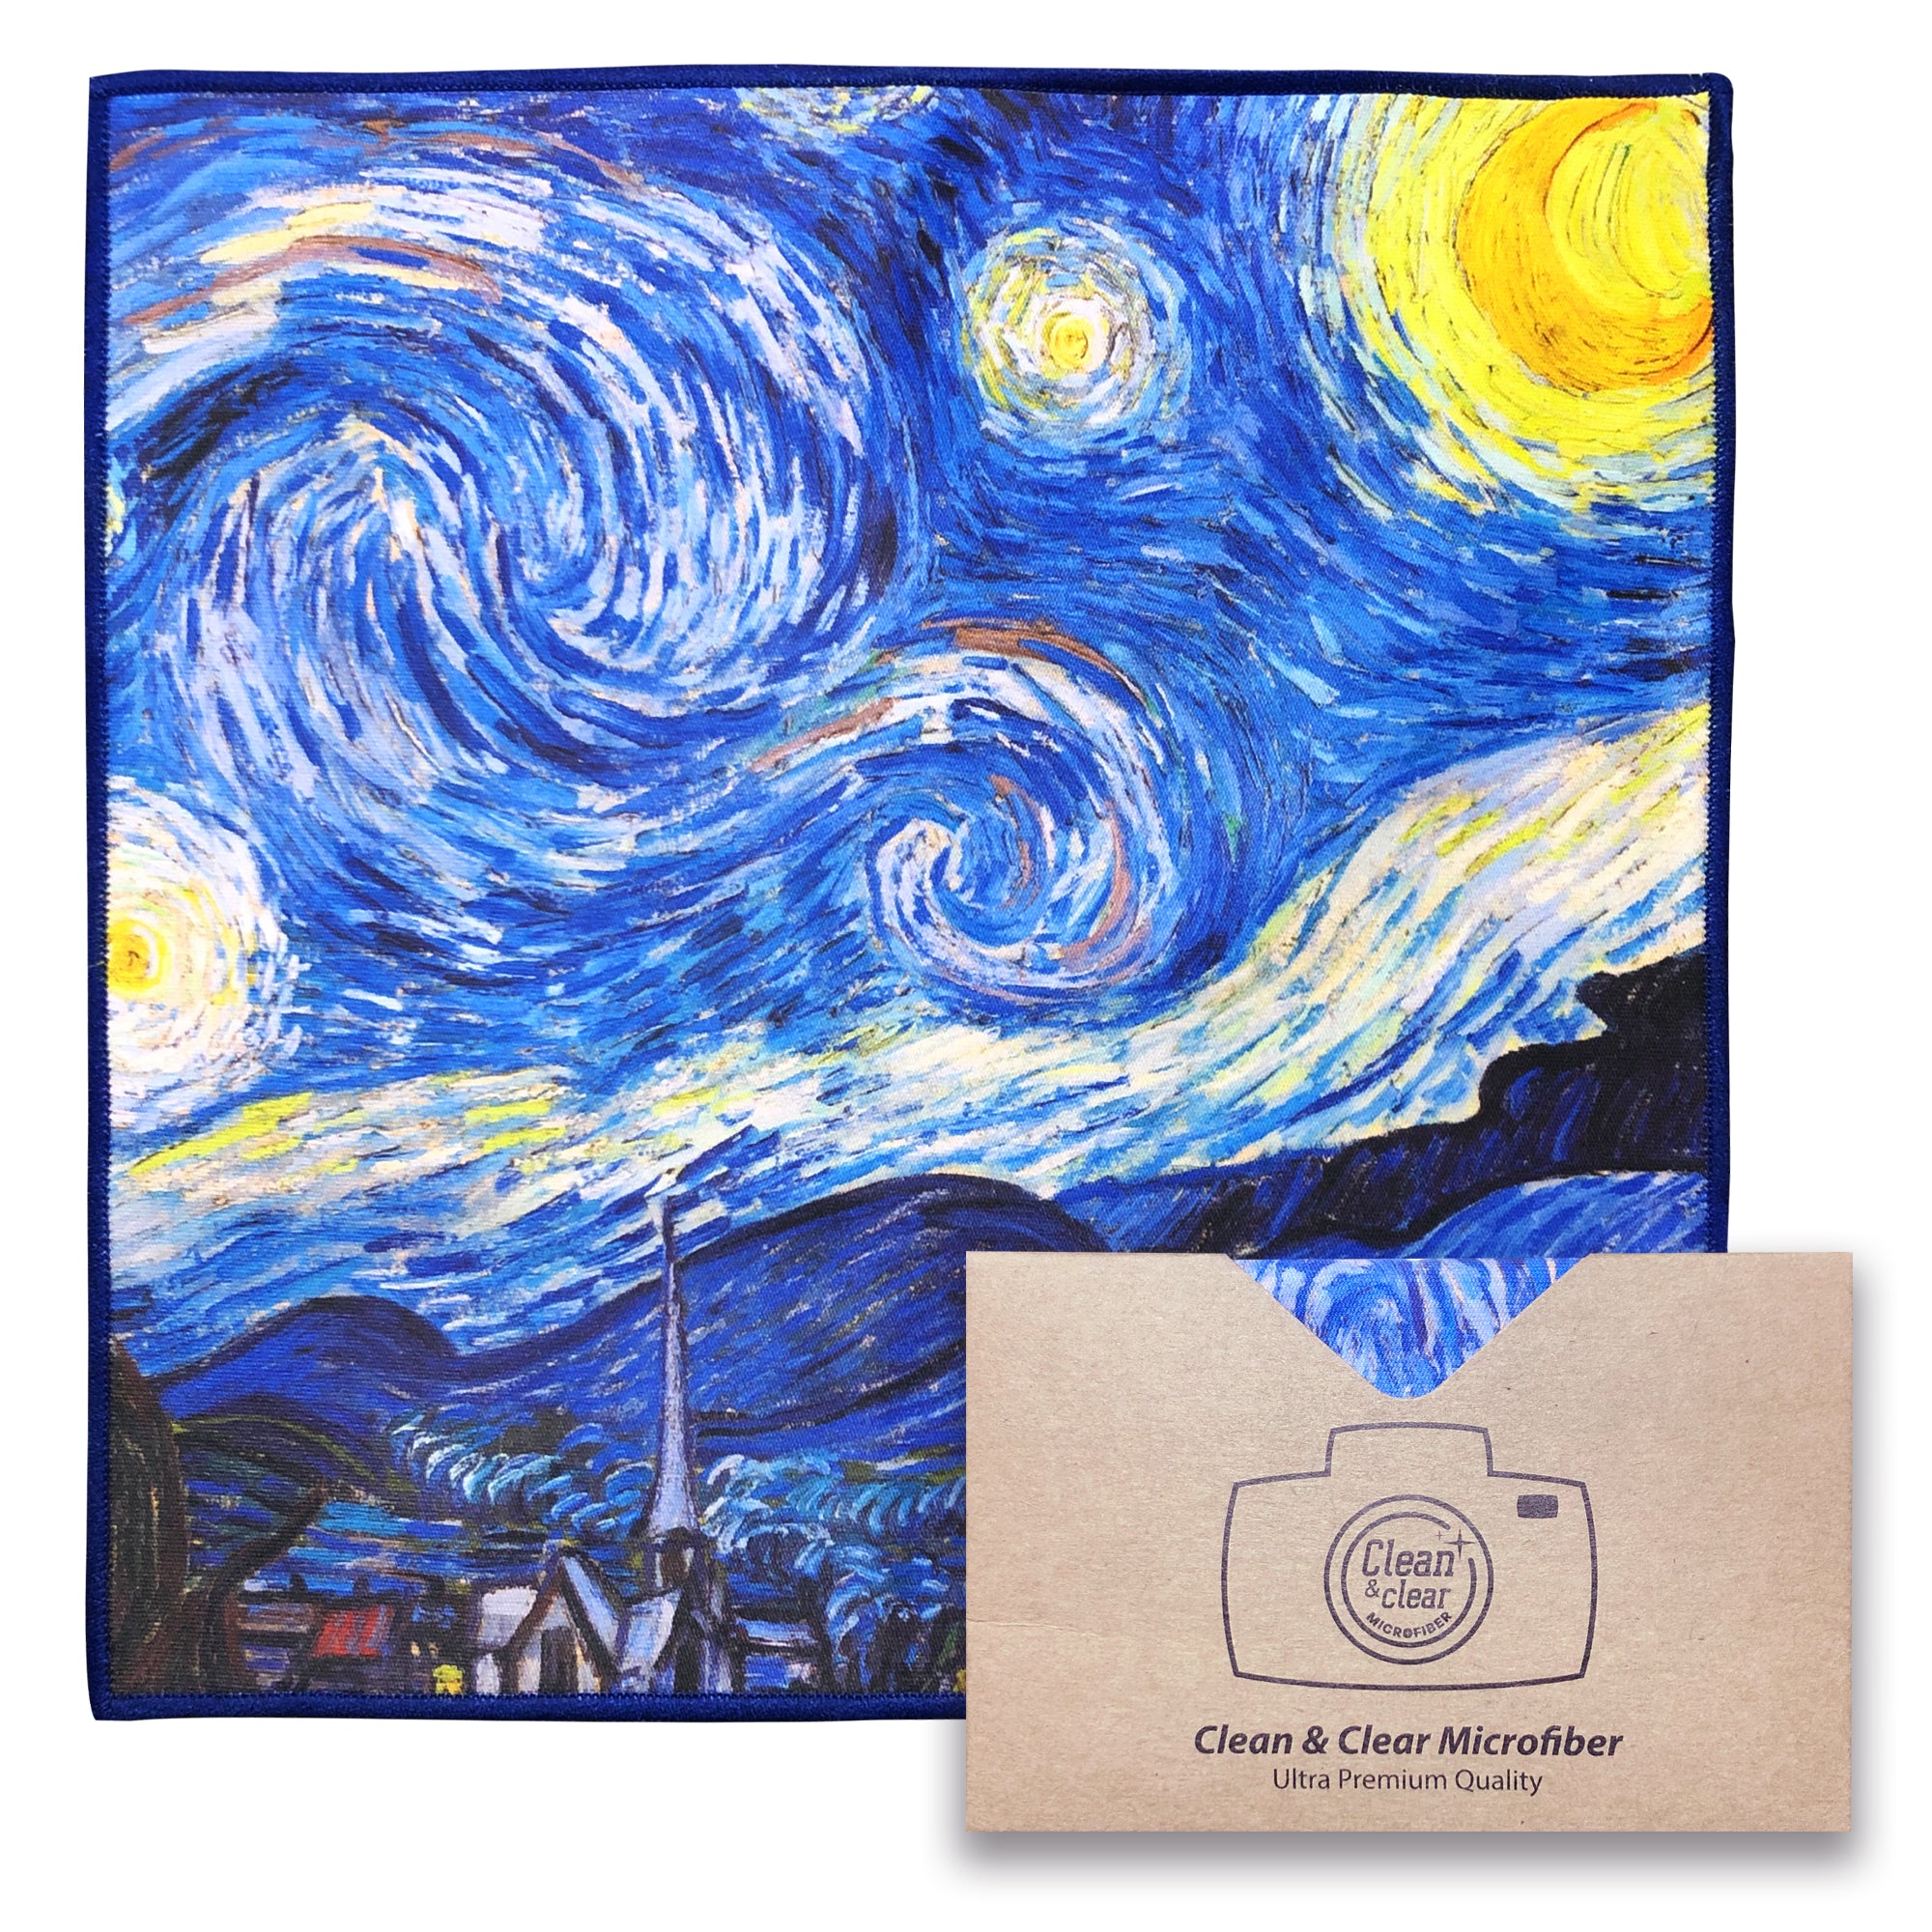 [6 Pack] Vincent Van Gogh "The Starry Night" - Art Collection - Ultra Premium Quality Microfiber Cleaning Cloths